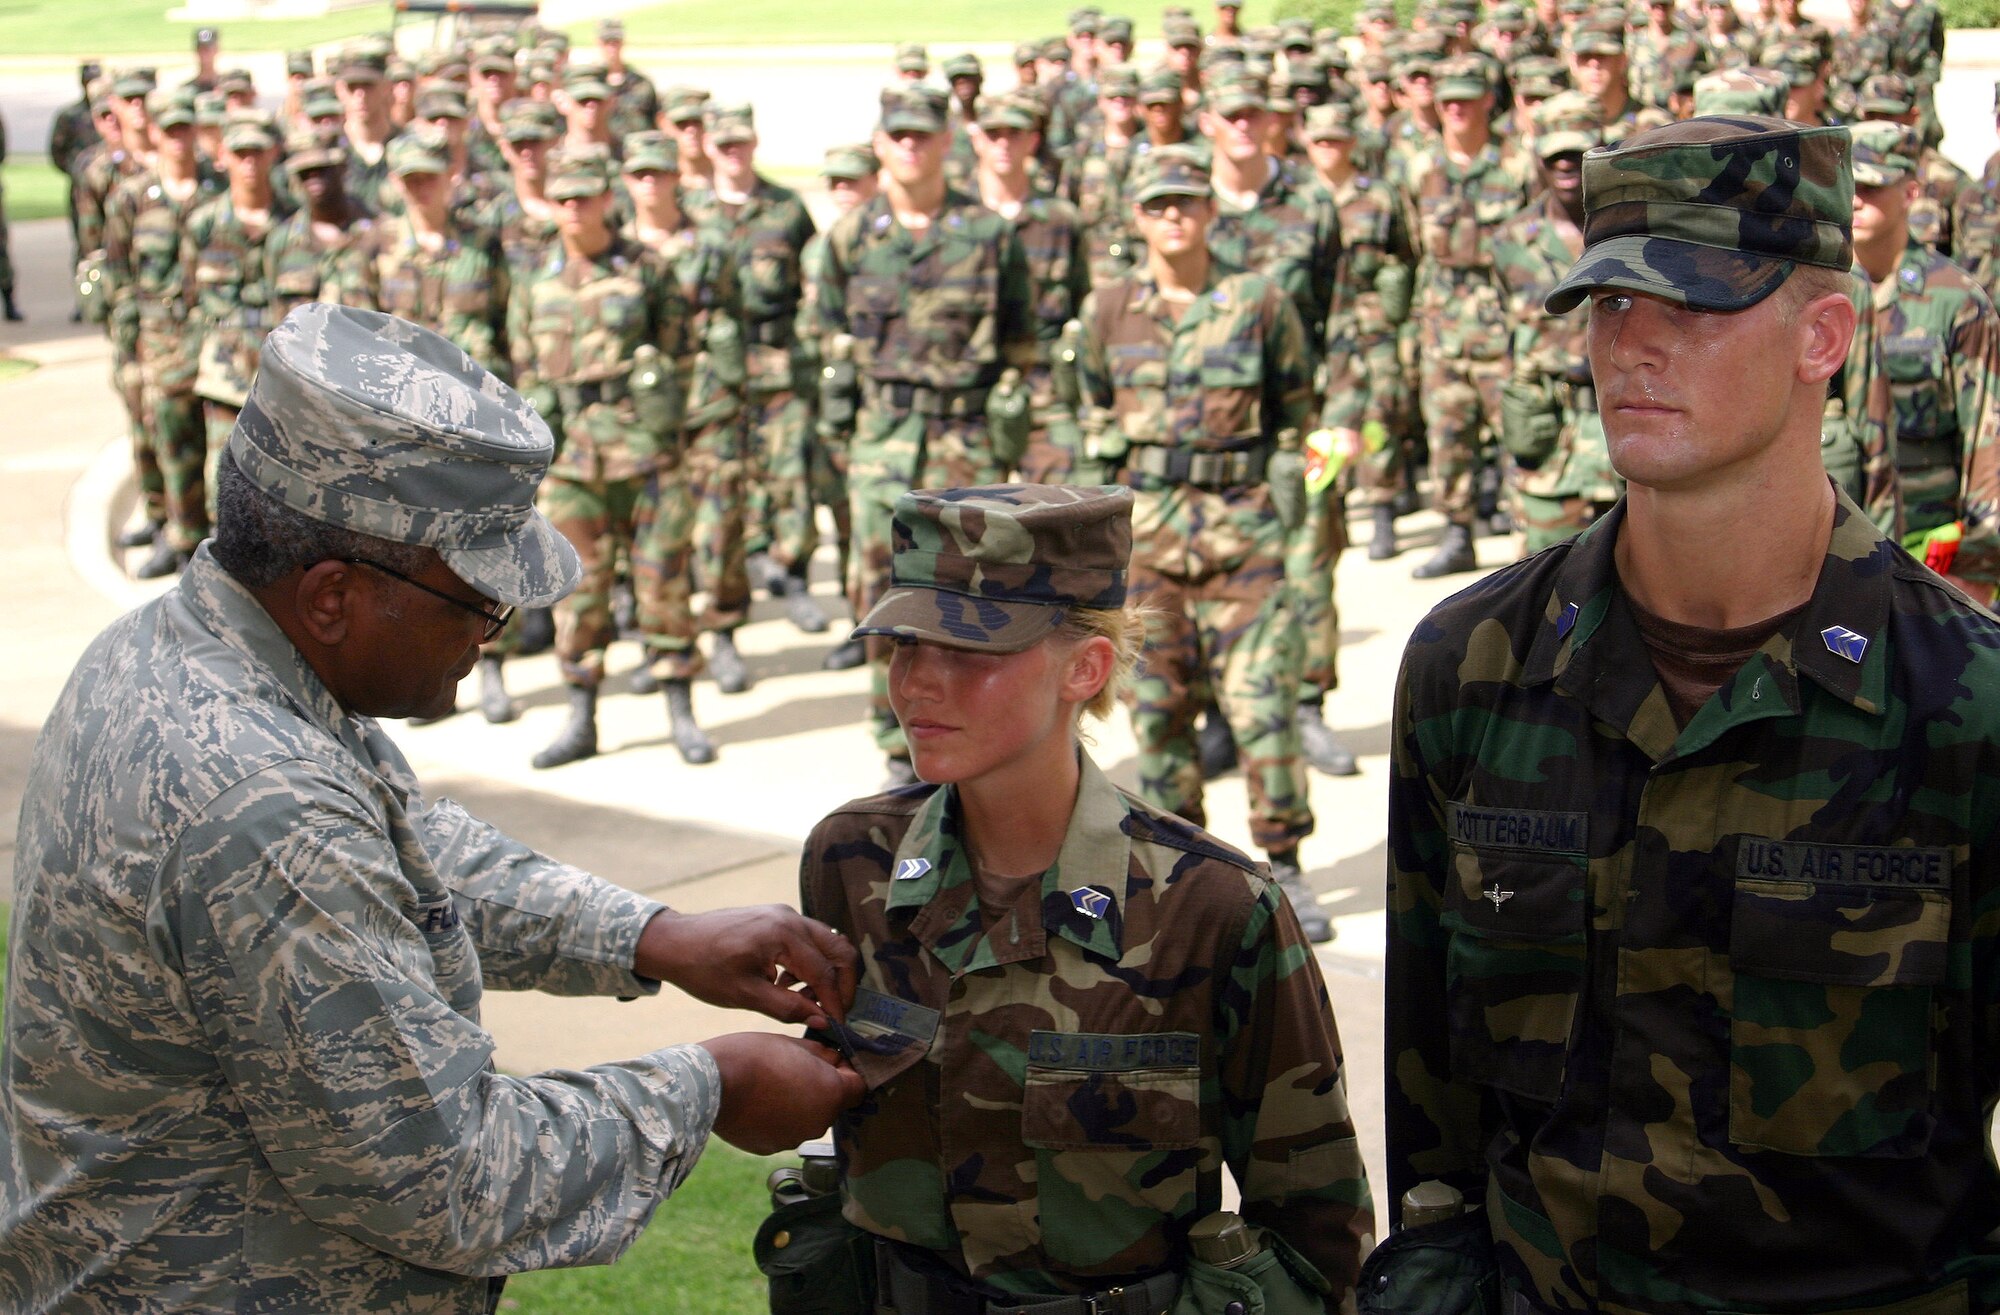 Brig. Gen. Alfred Flowers, Air Force Officer Accessions and Training commander, pins the Prop and Wings pin on Cadet Group Commander Jefre Potterbaum (right) and Deputy Group Commander Ashley Currie July 17 at the conclusion of the Prop and Wings Challenge at Maxwell Air Force Base, Ala. The challenge tested more than 330 cadets with mental and physical activities during the 27-day field training event. (U.S. Air Force photo/Staff Sgt. Jason Lake)